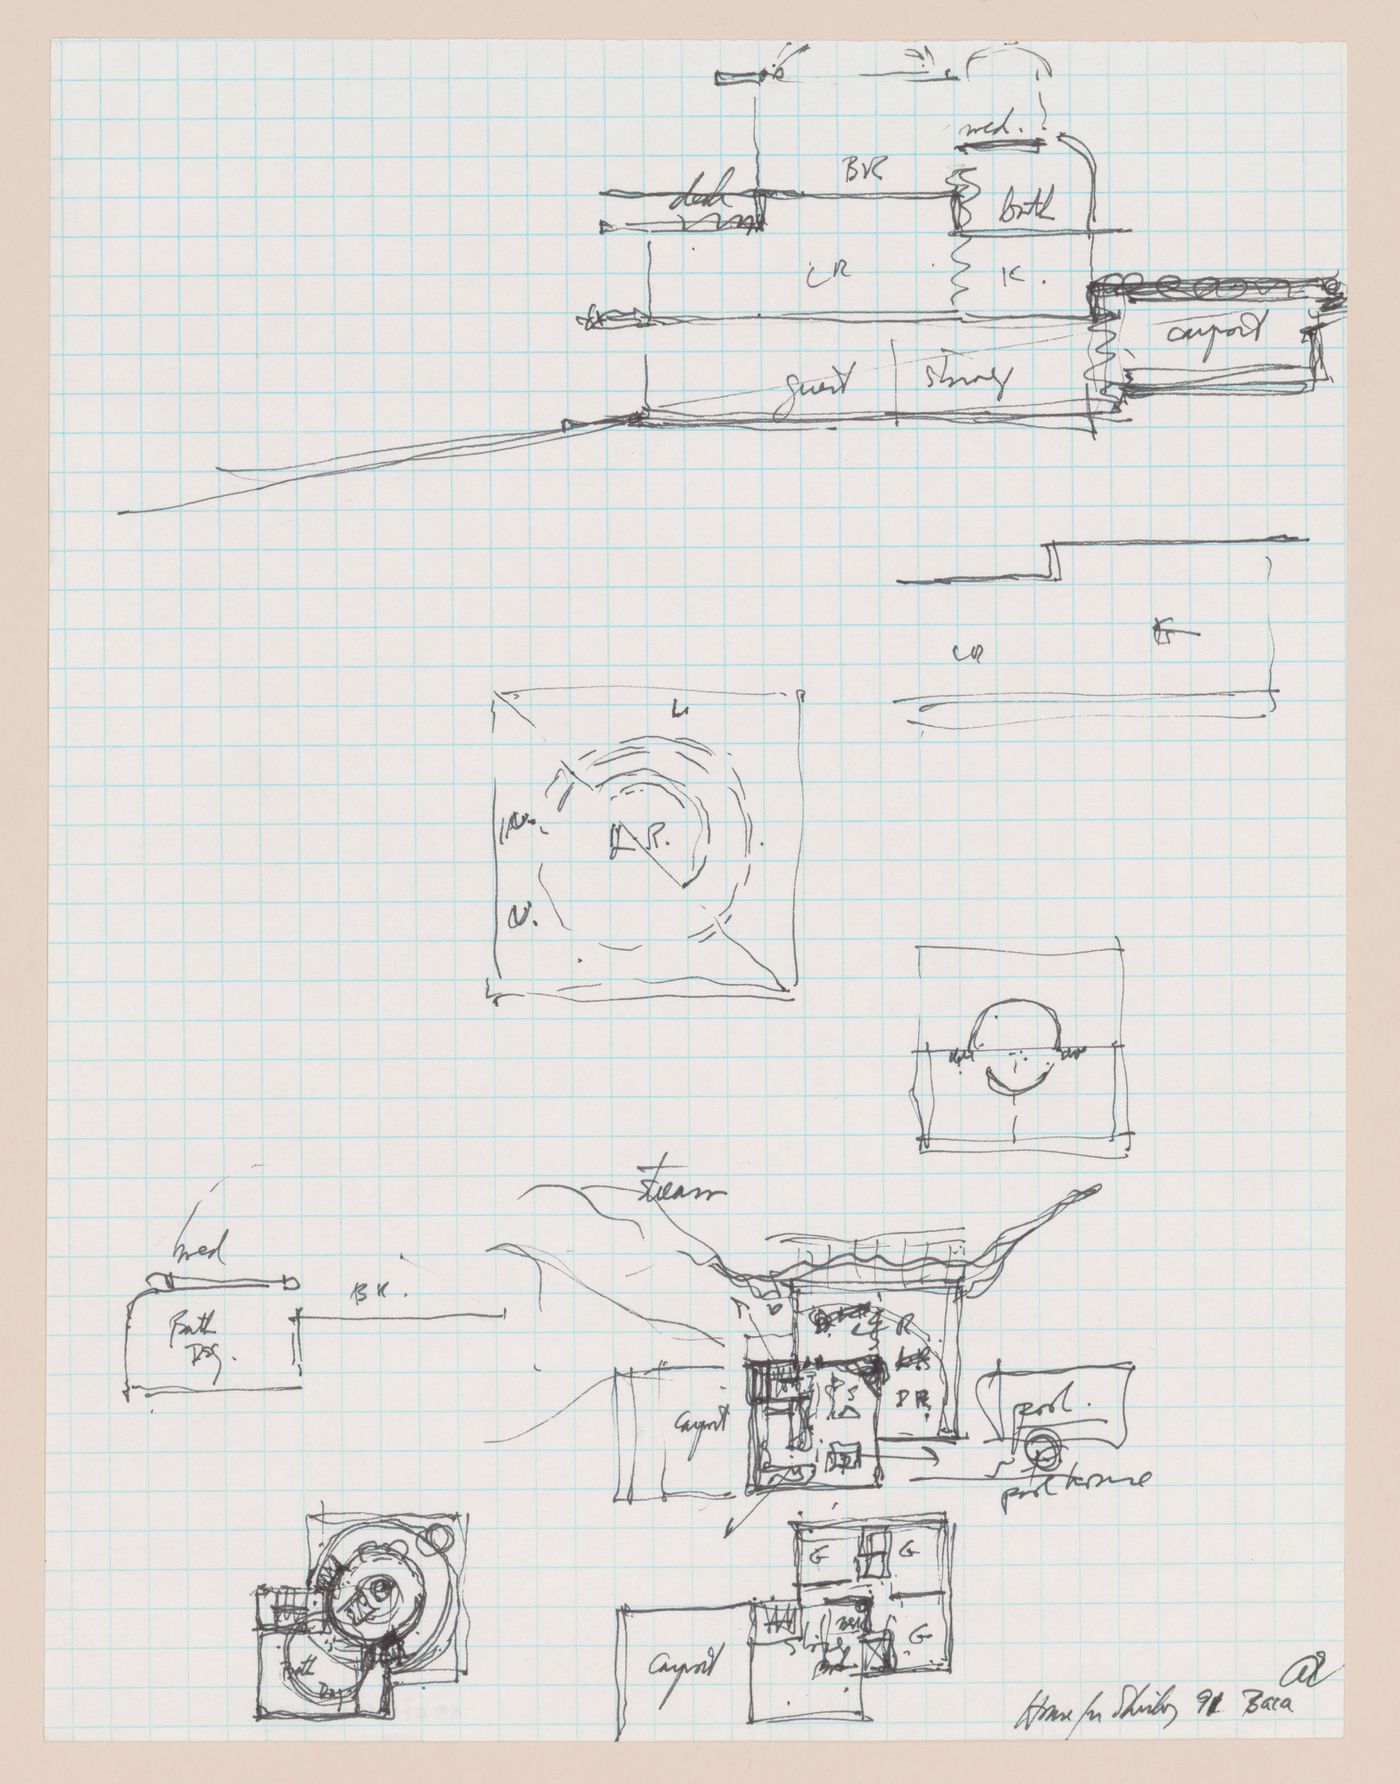 Sketch plans and sections for Shirley MacLaine House, De Baca County, New Mexico